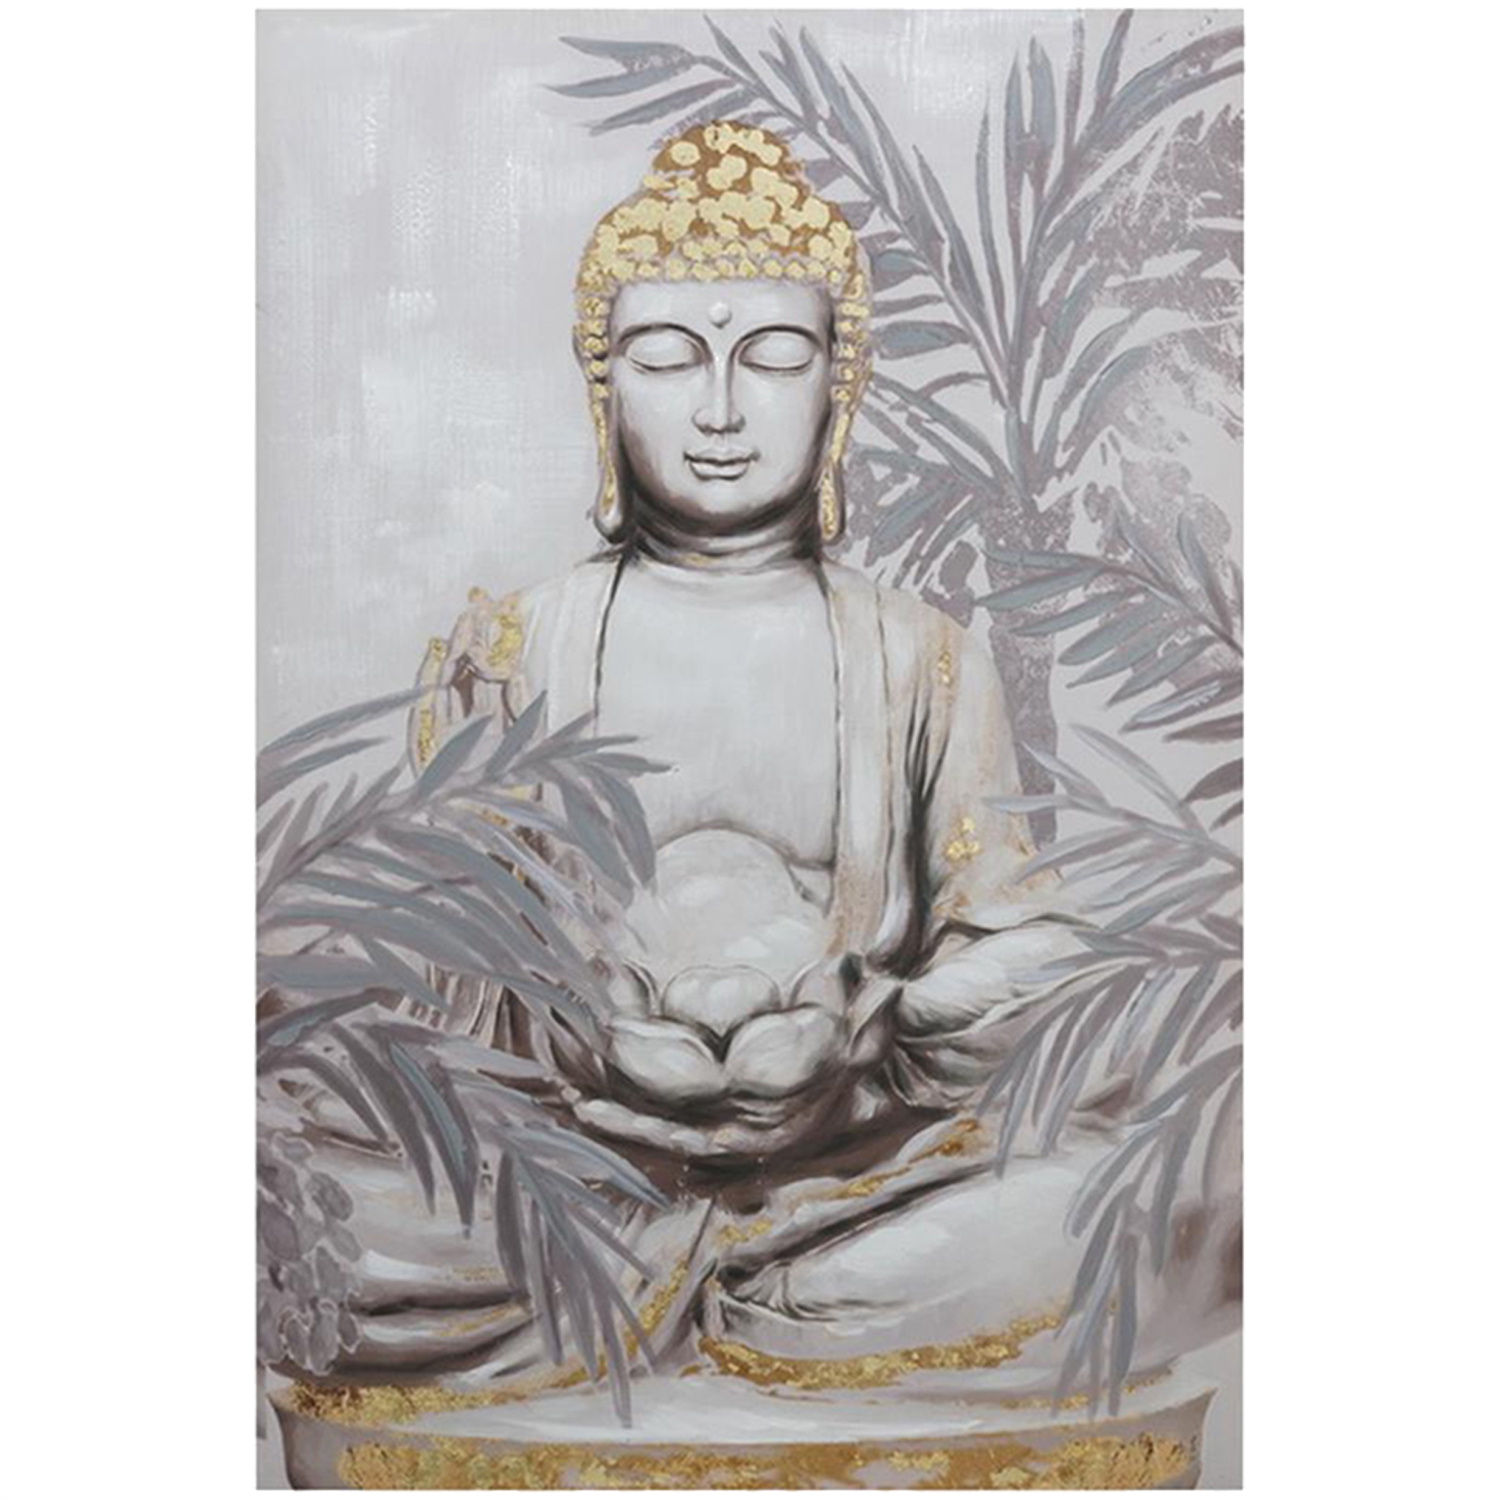 Cuadro Buda Relax 80 x 120 Voeux Store